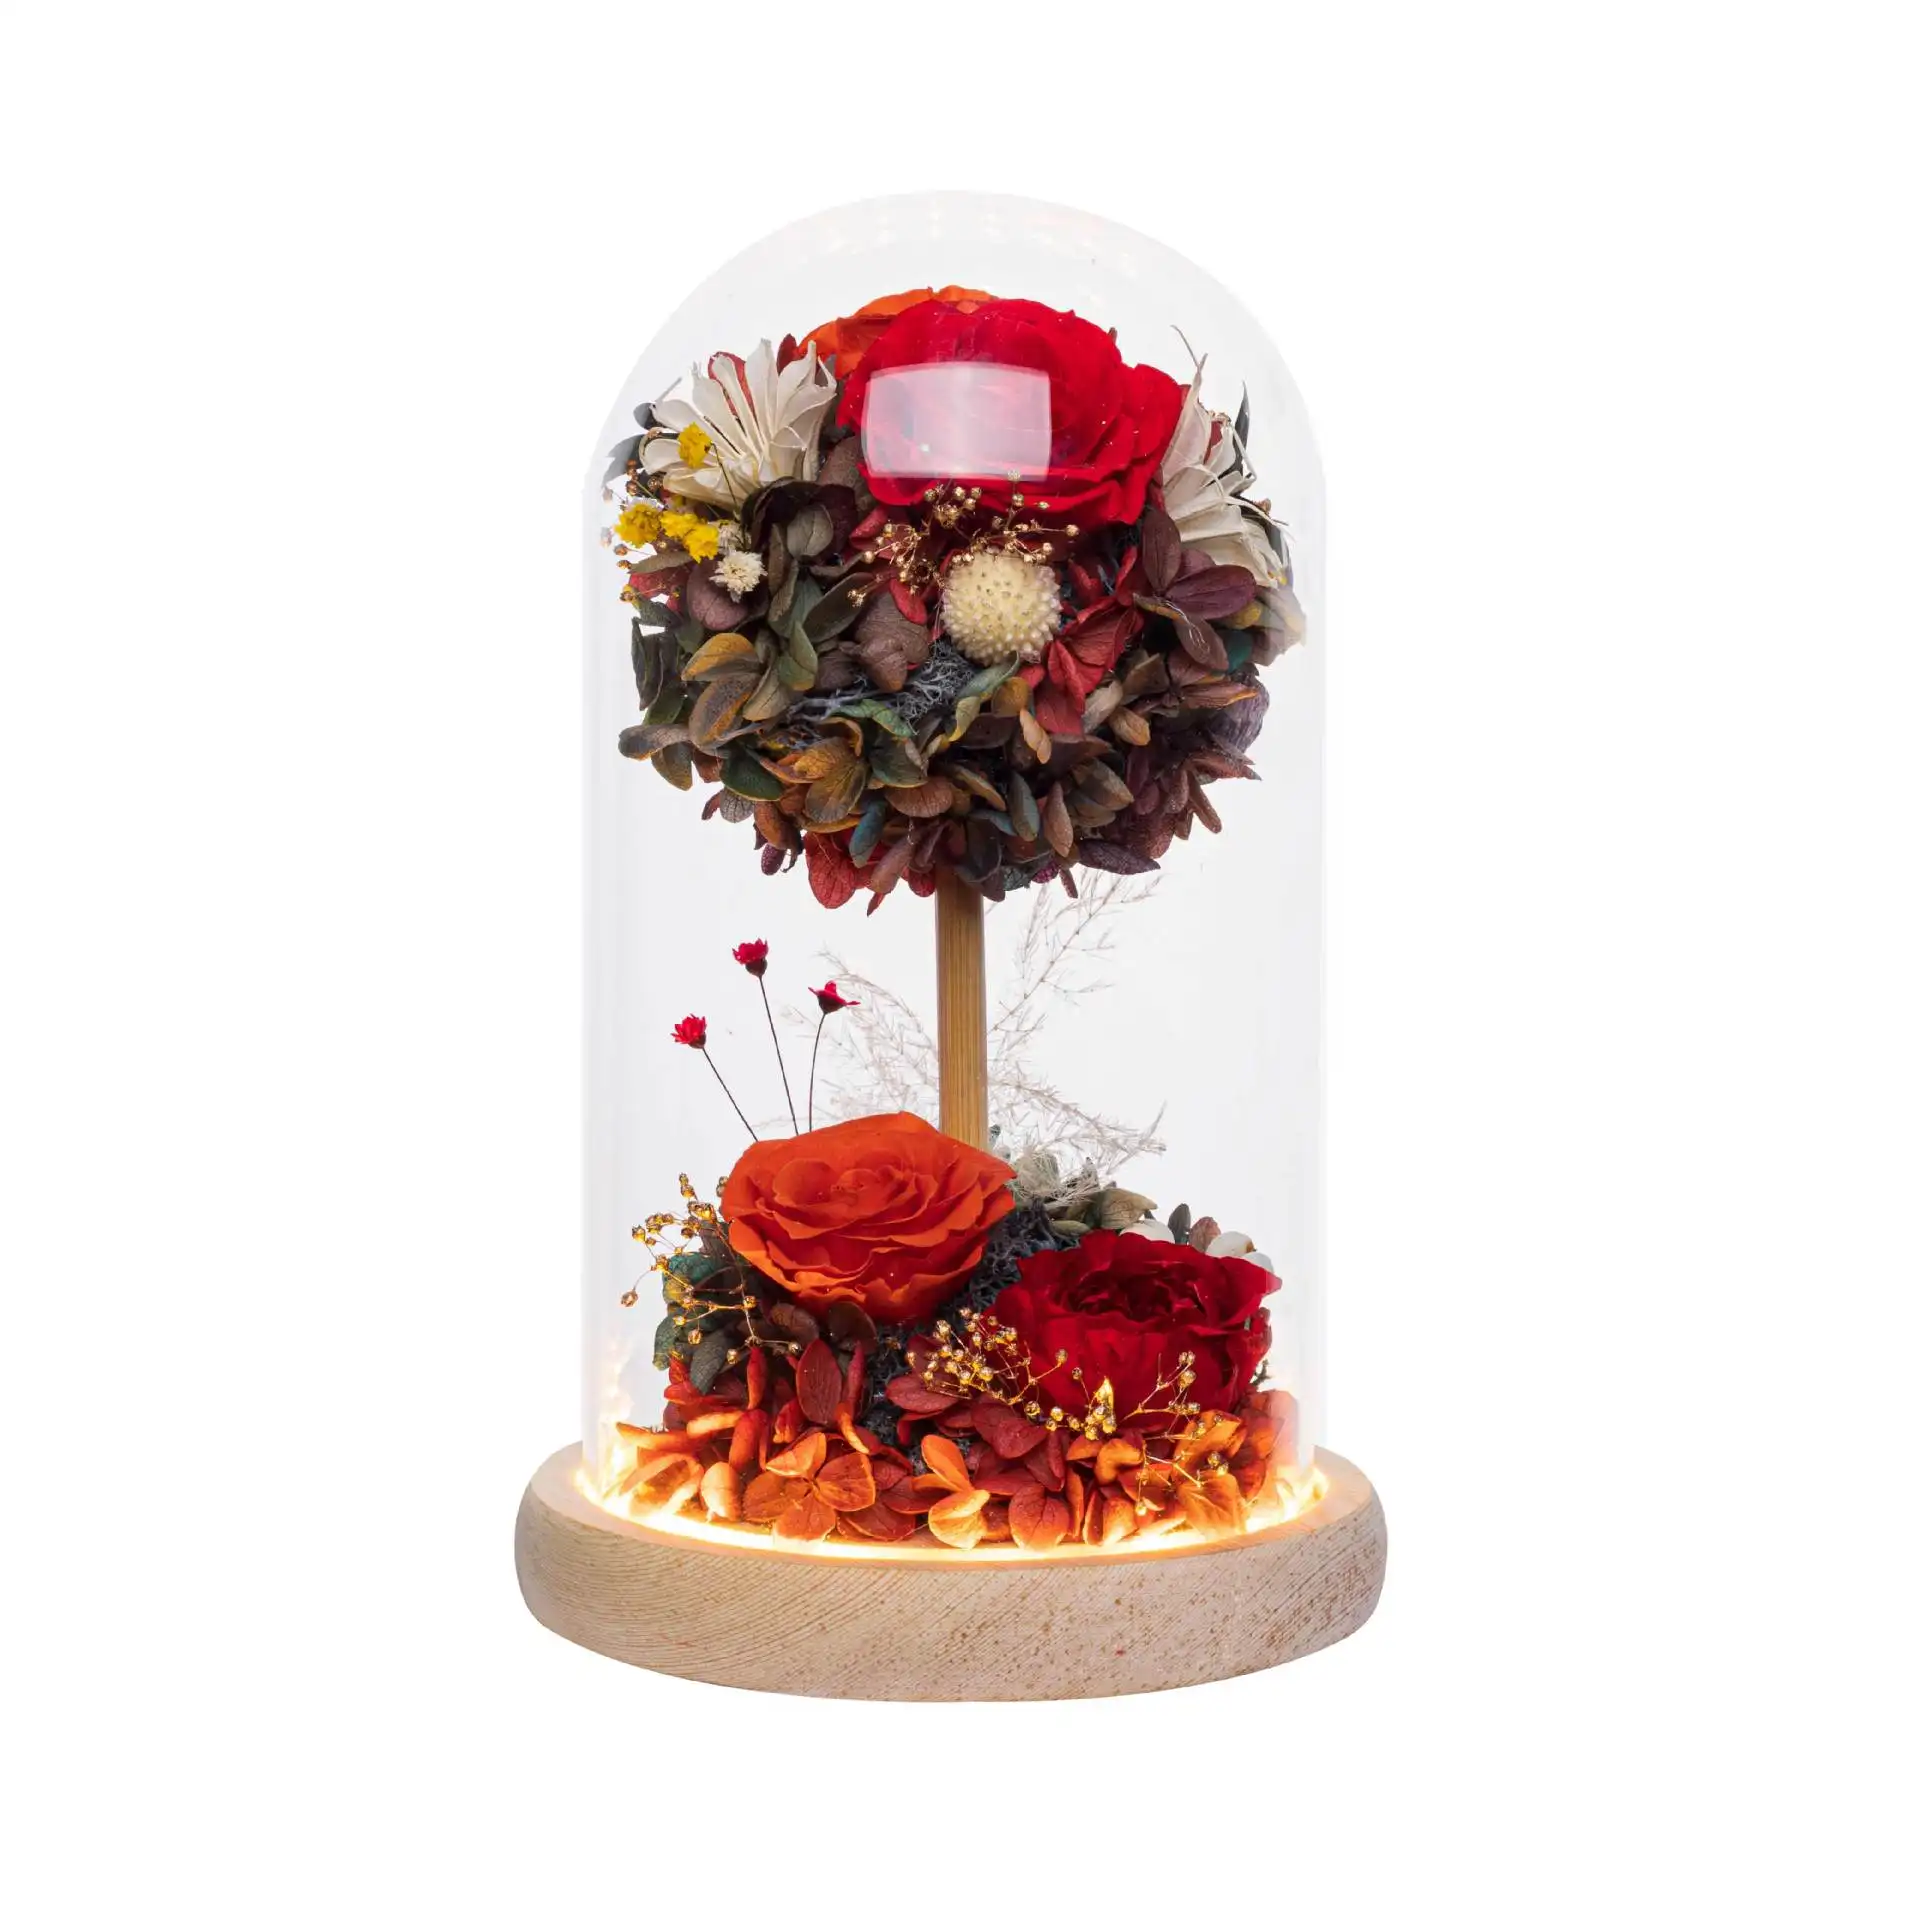 2023 new product ideas preserved roses flowers hydrangea wish tree in glass dome for valentines day gift